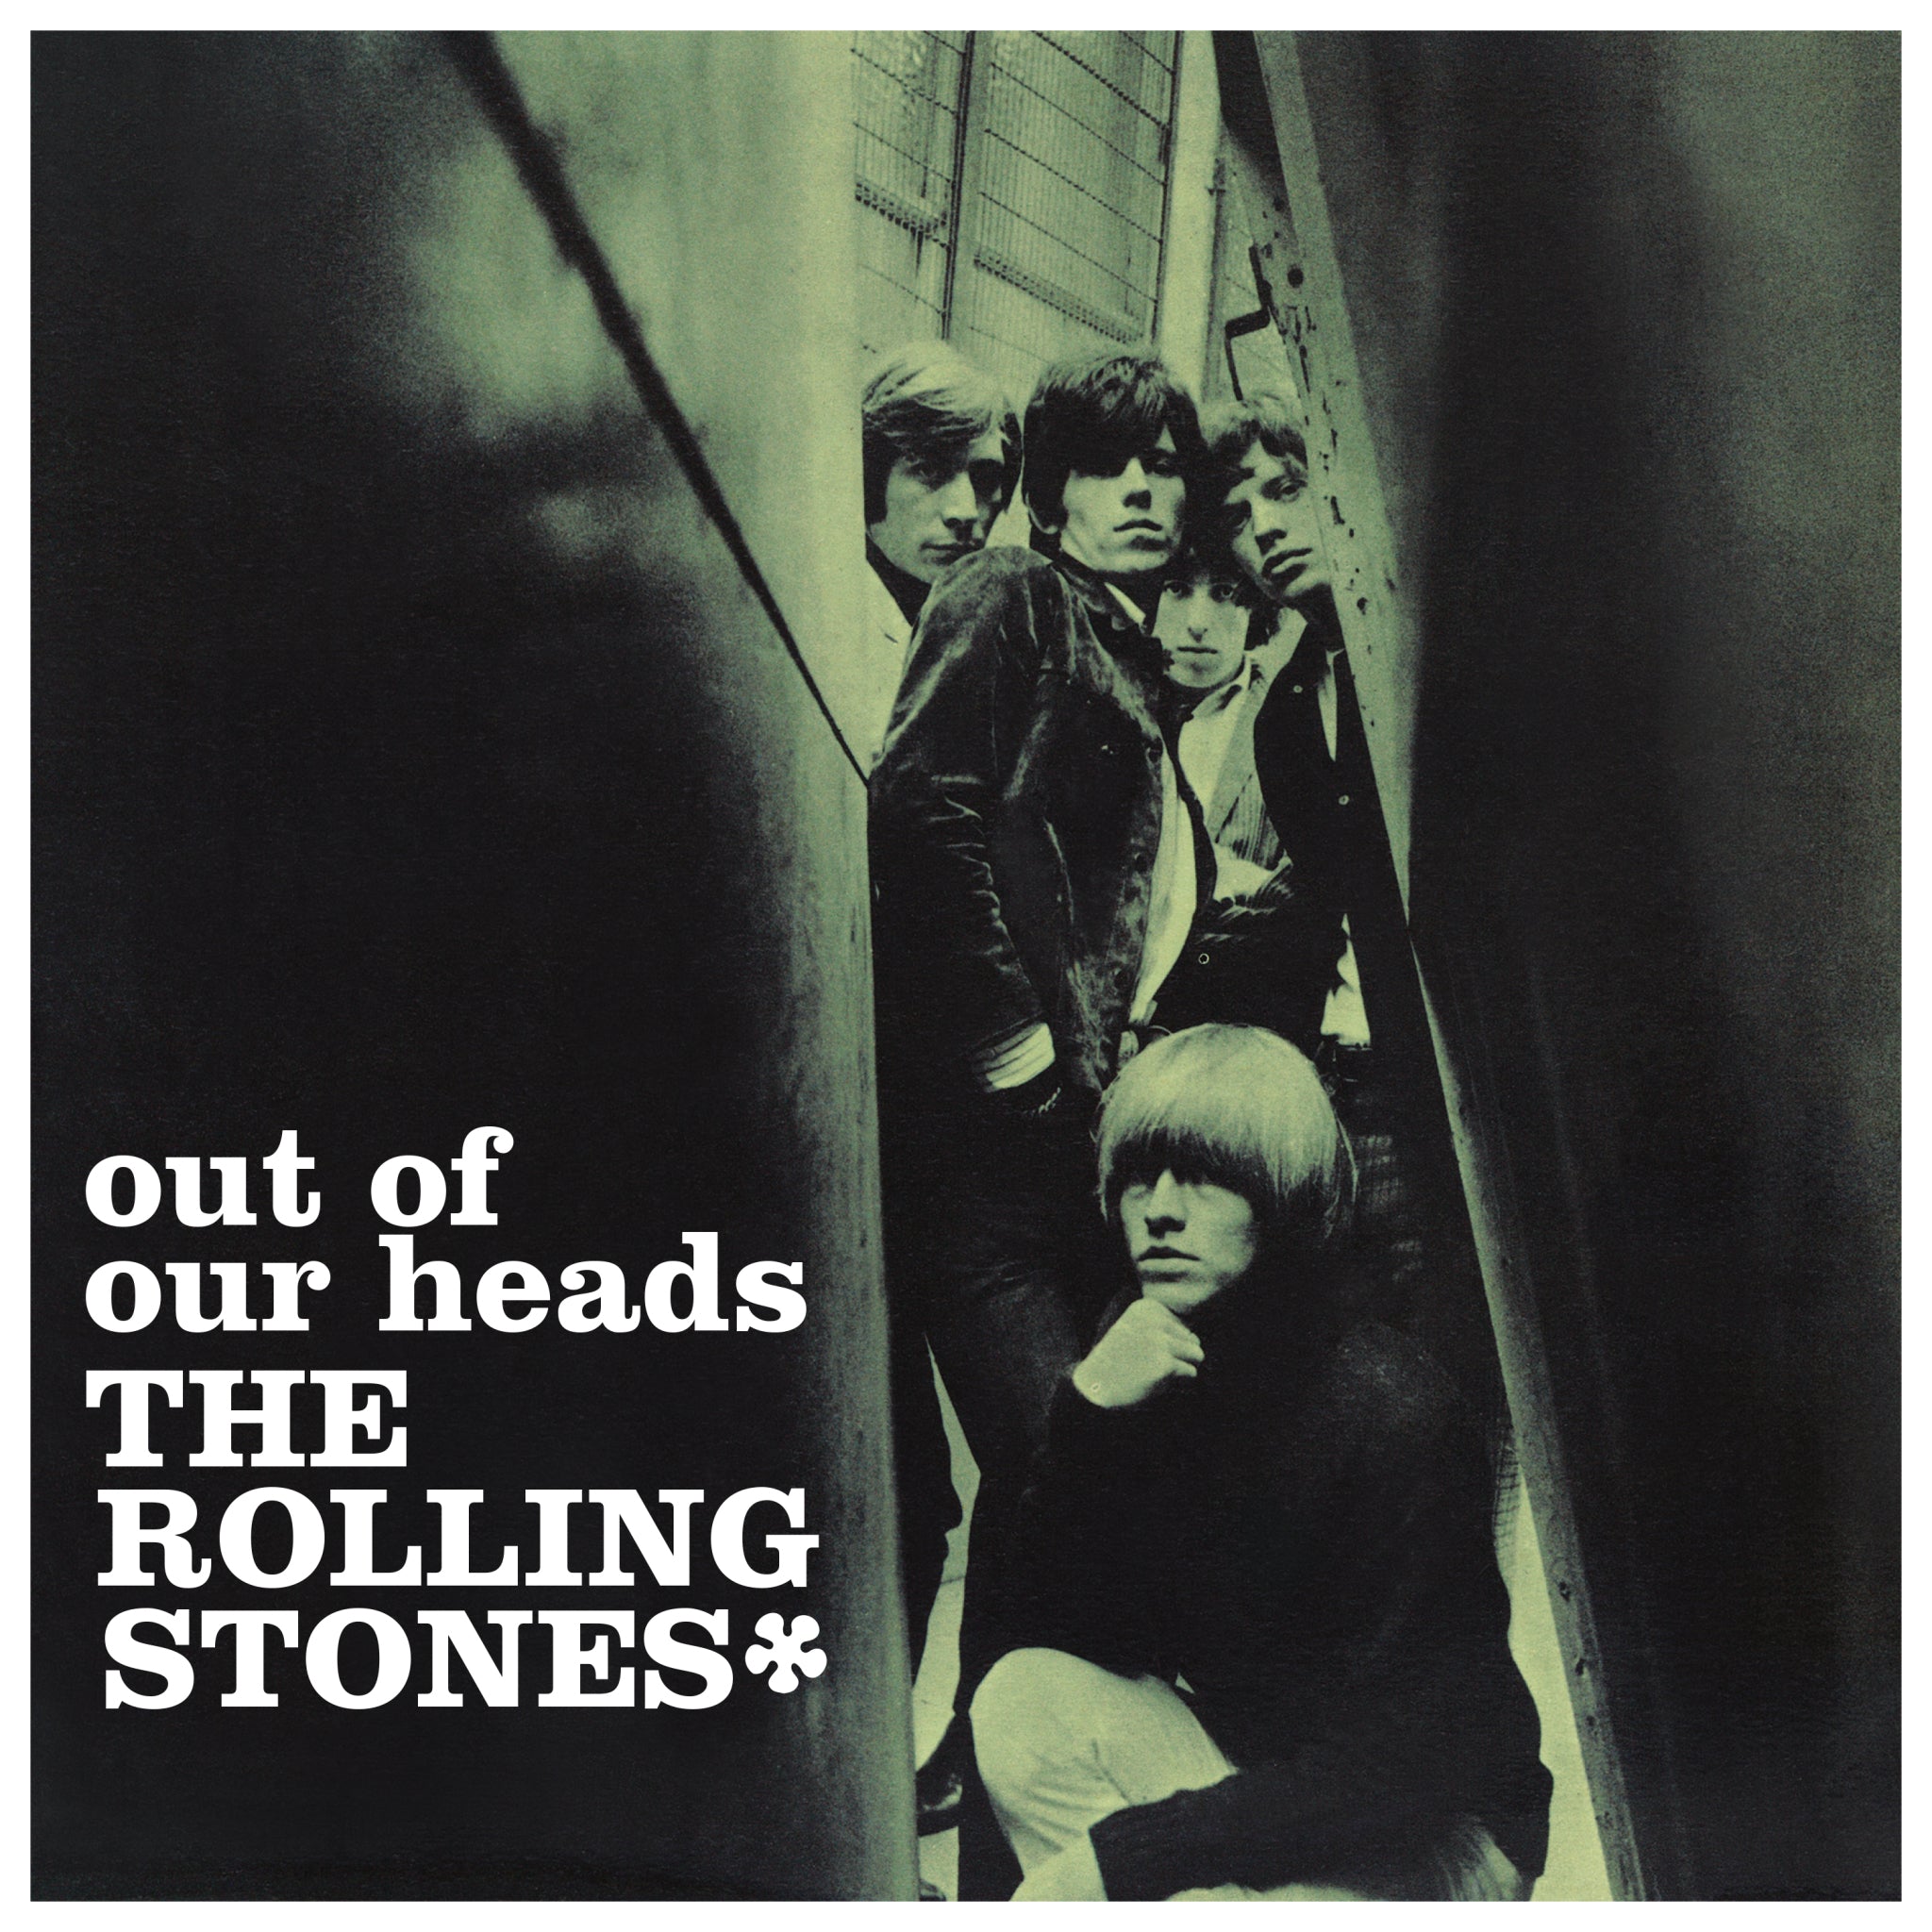 The Rolling Stones - Out of Our Heads (UK Edition): Vinyl LP